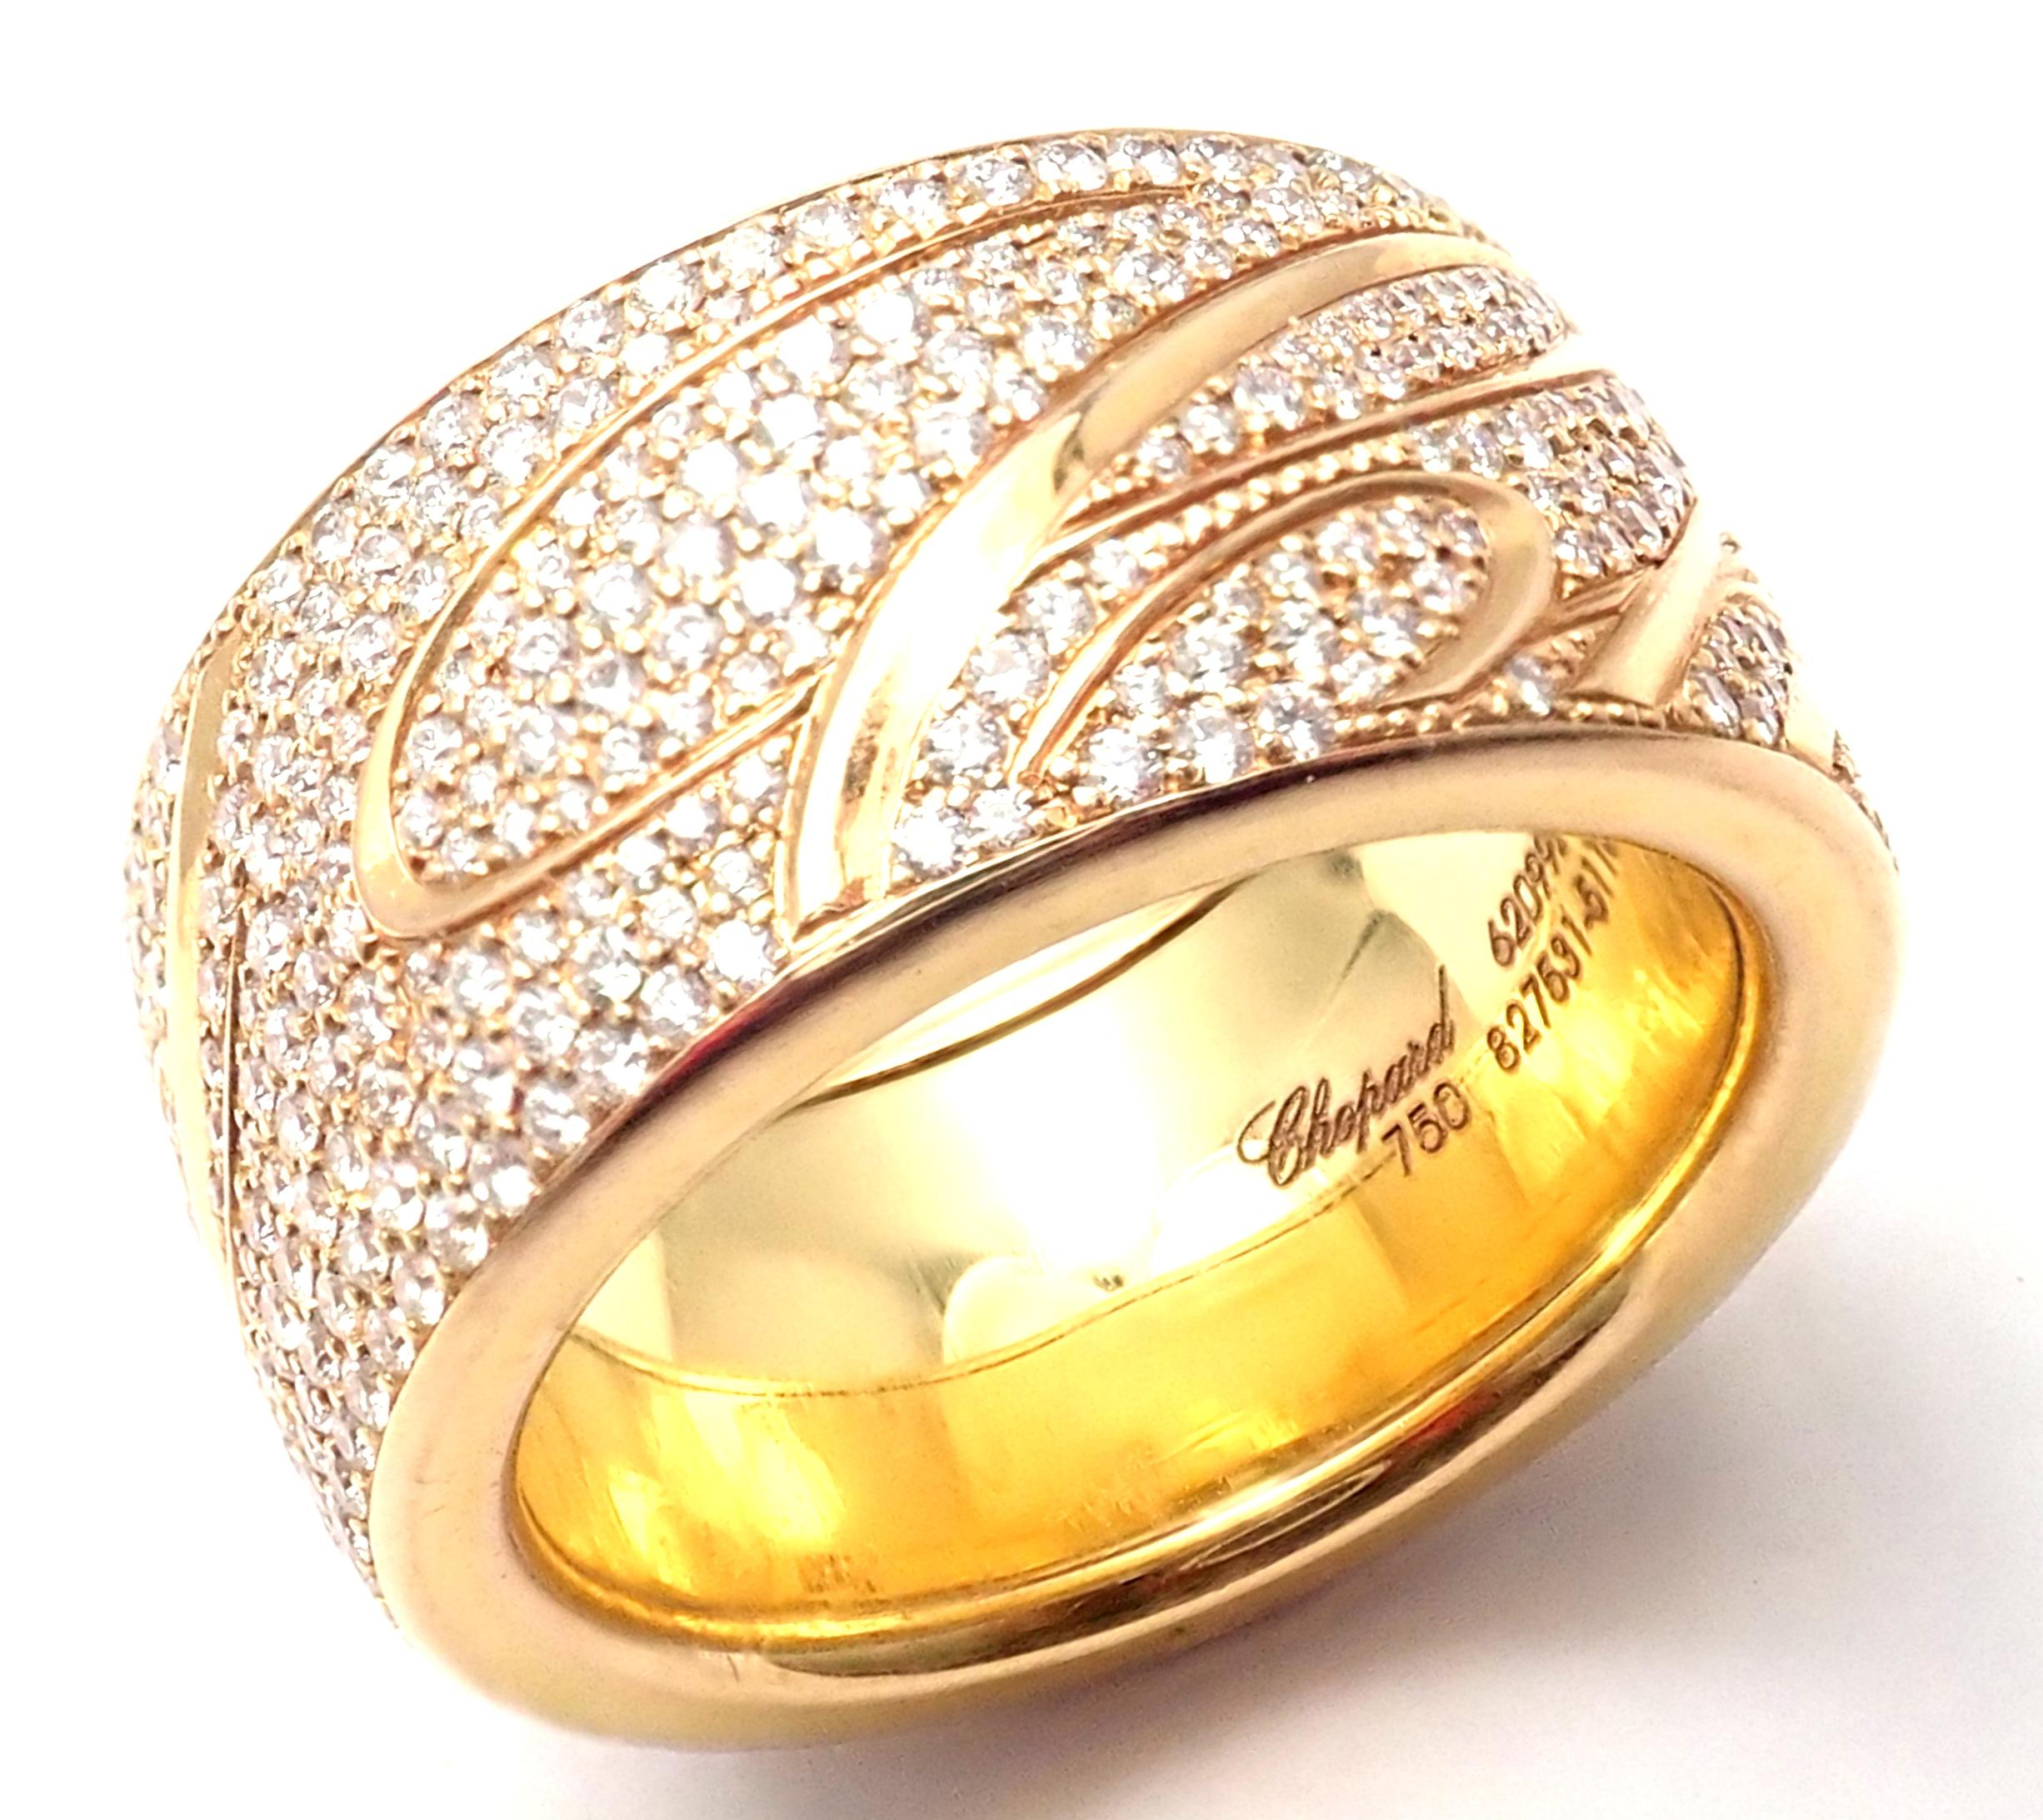 Chopard Chopardissimo 18 Karat Yellow Gold Pavé Diamond Signature Wide Band Ring For Sale 1